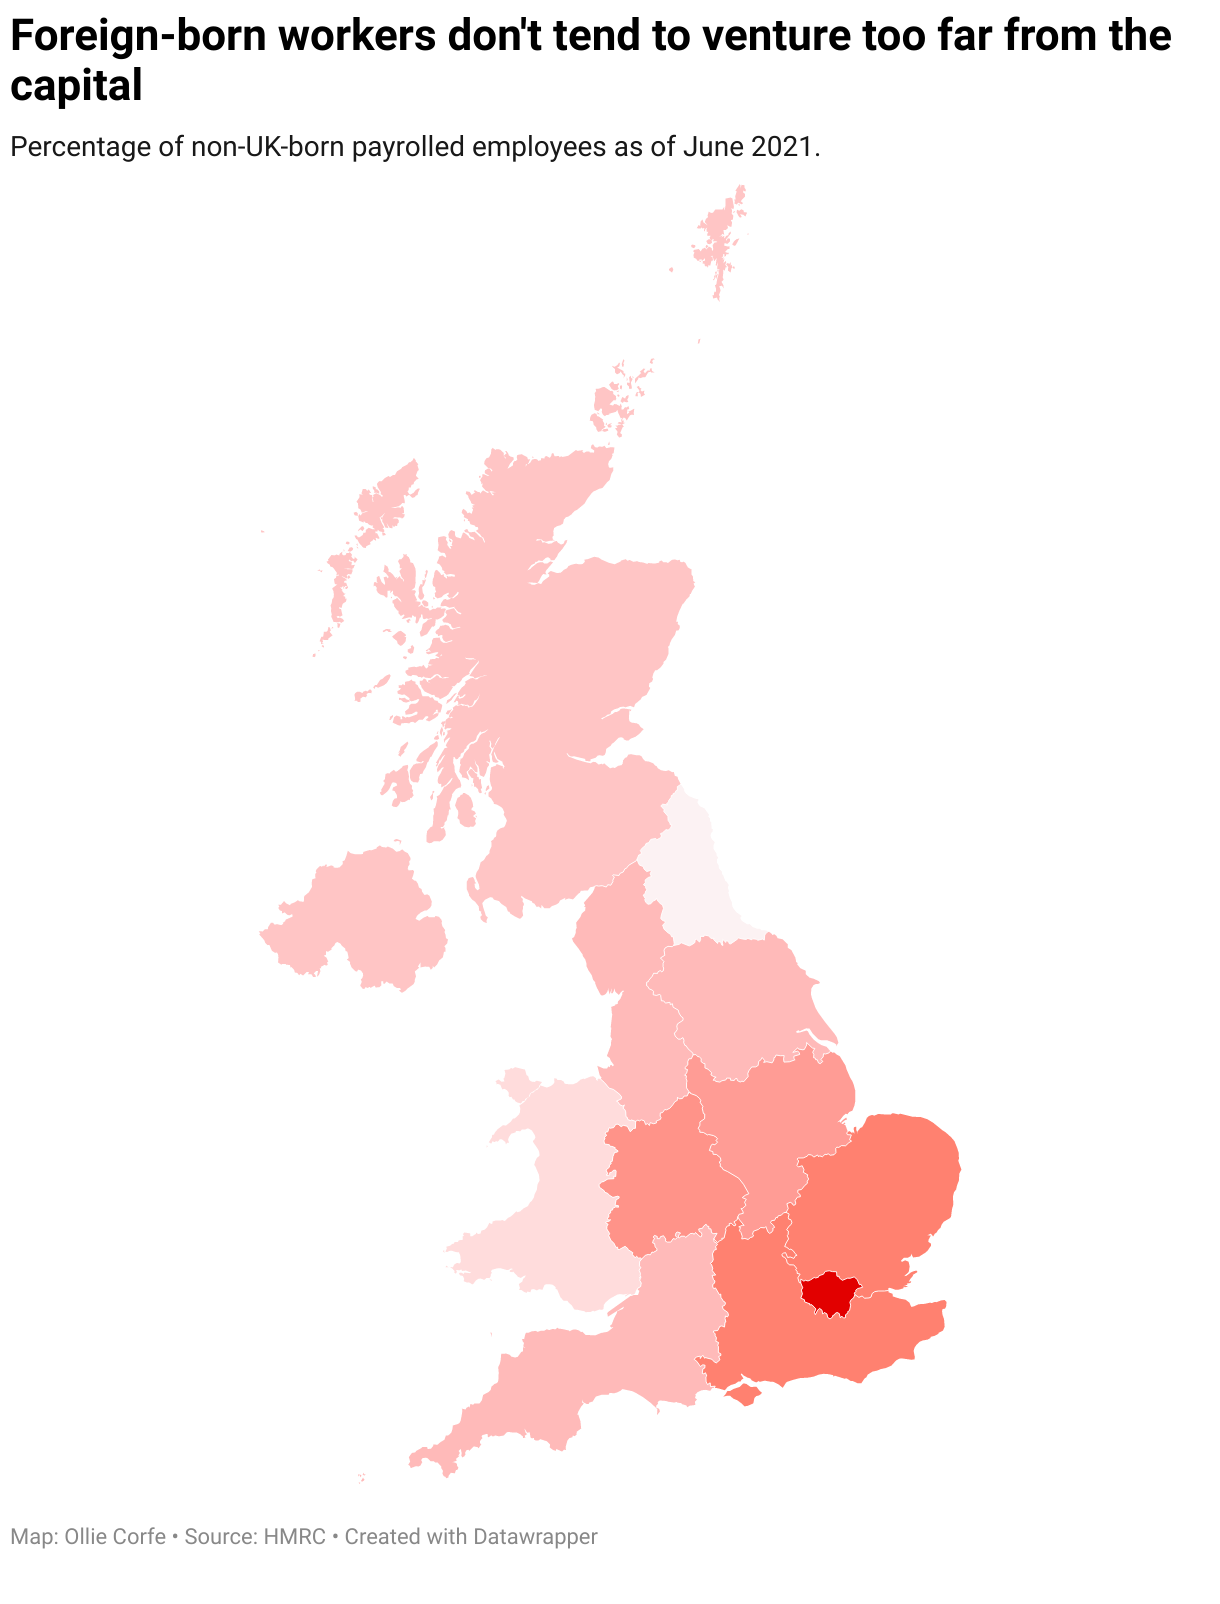 Map of foreign-born workers as a share of all payrolled employees per UK region.